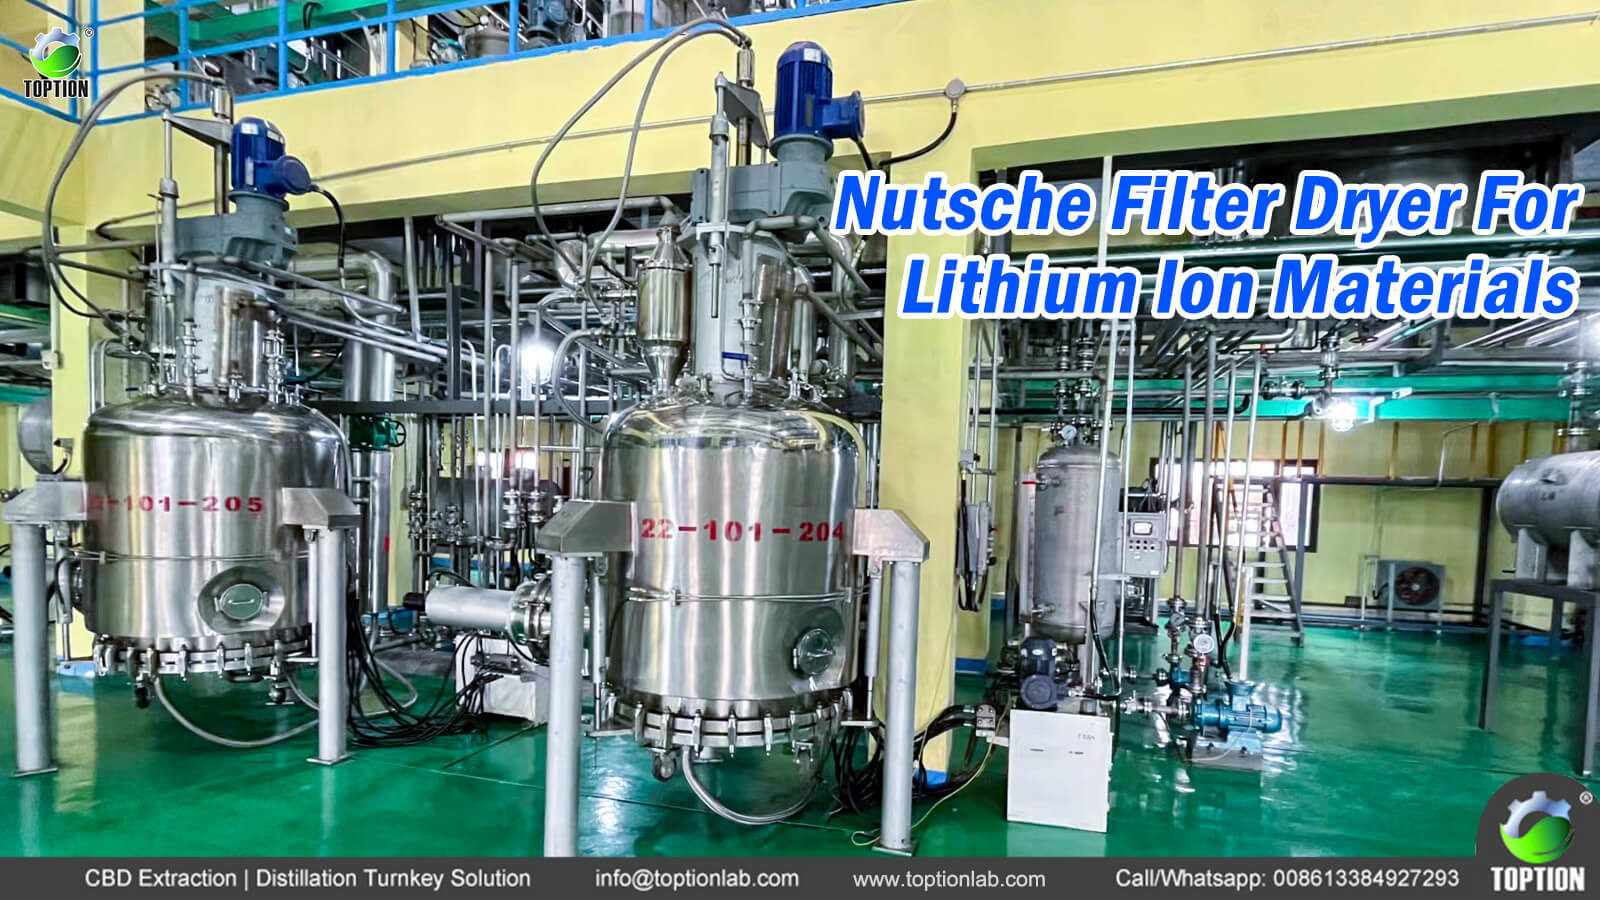 latest company news about Nutsche Filter Dryer For Lithium Ion Materials  0